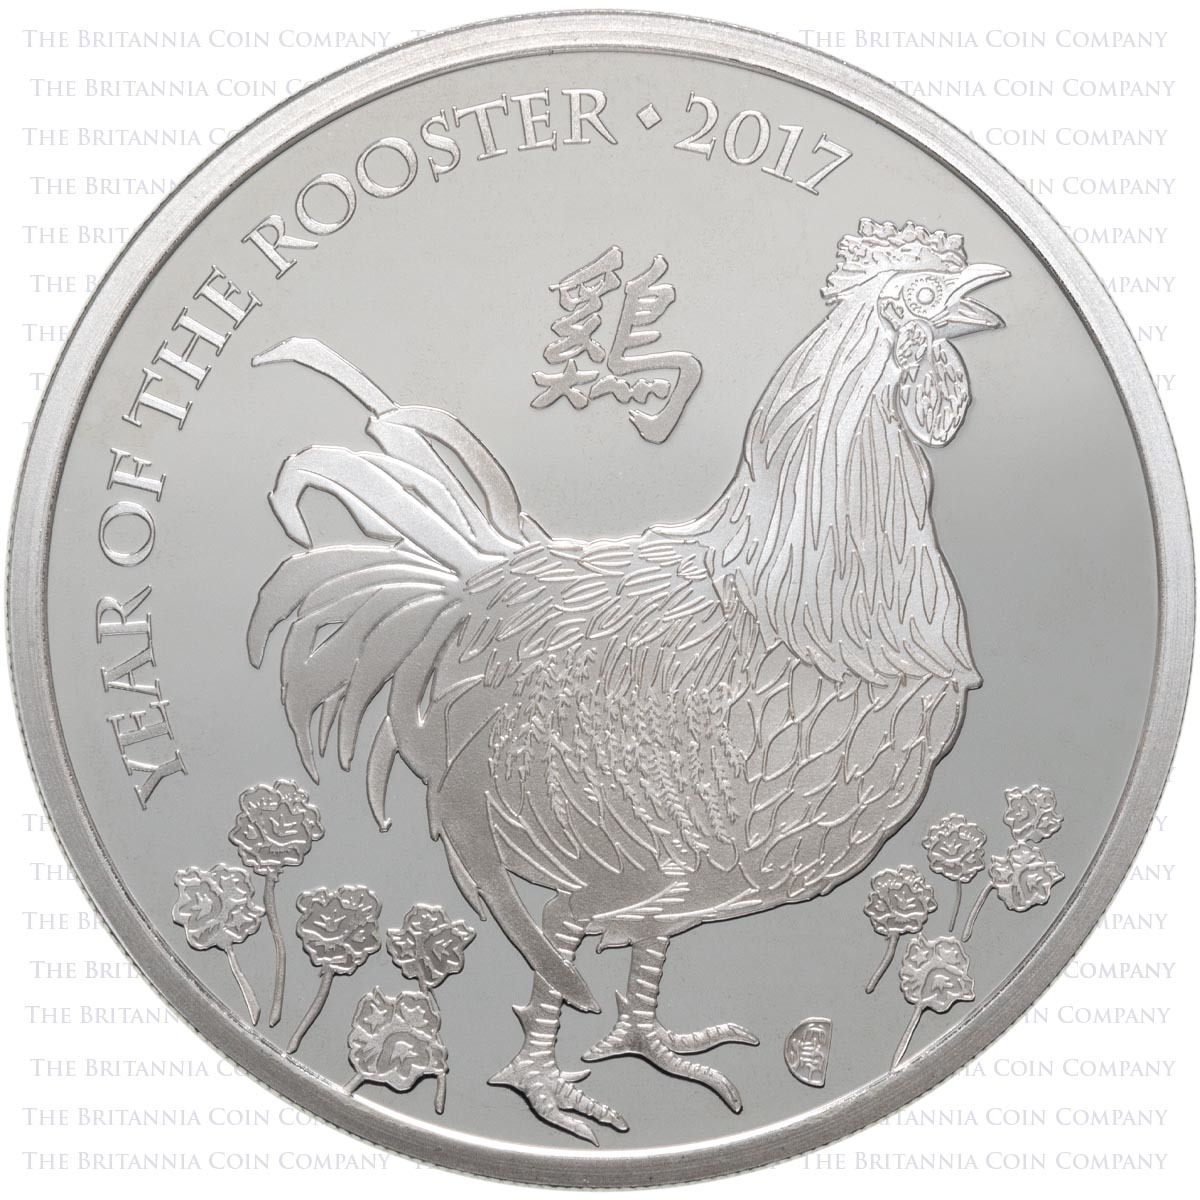 UKR17SP 2017 Lunar Year Of The Rooster One Ounce Silver Proof Coin Reverse